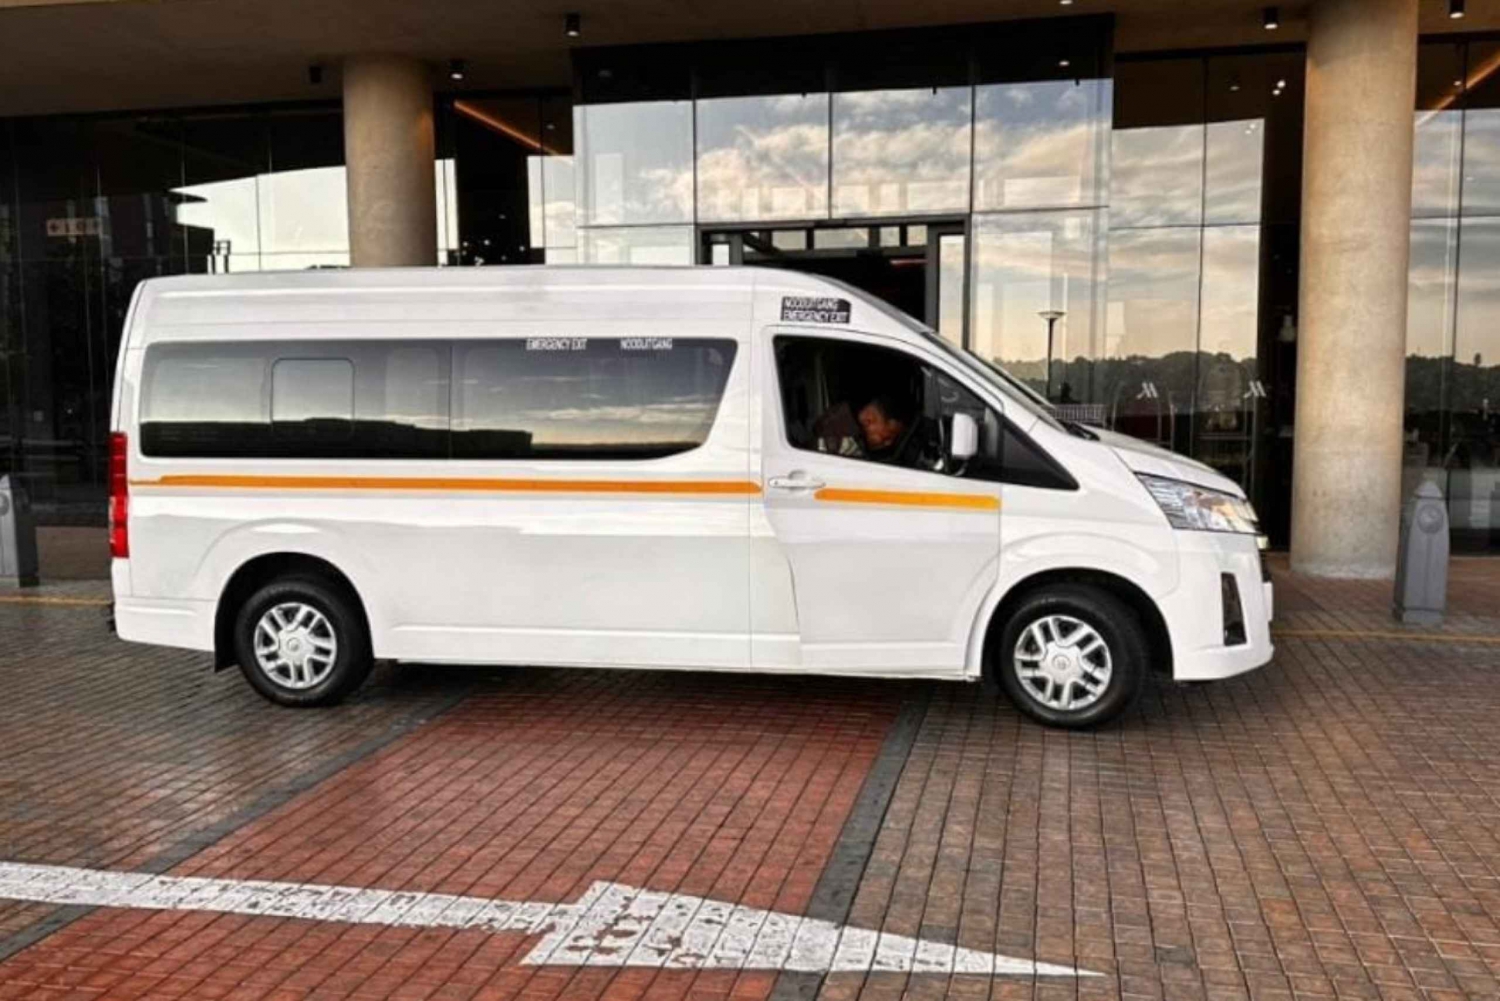 Hassle-Free Airport Shuttle: OR Tambo to Sandton Morningside